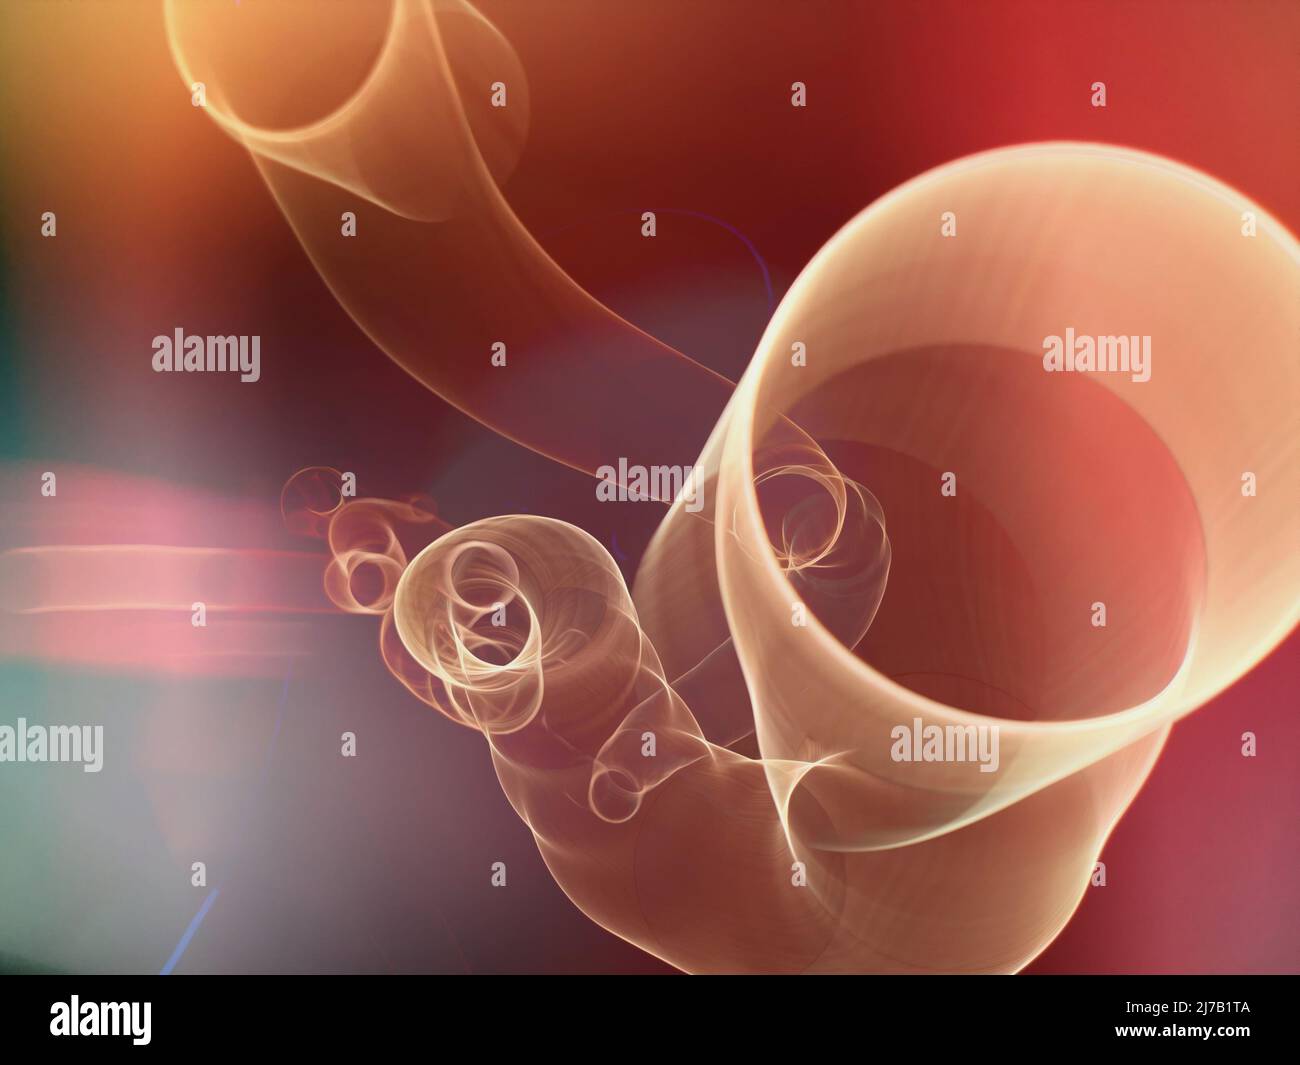 Abstract background, cardiovascular system, biology and health, concepts. High quality illustration Stock Photo